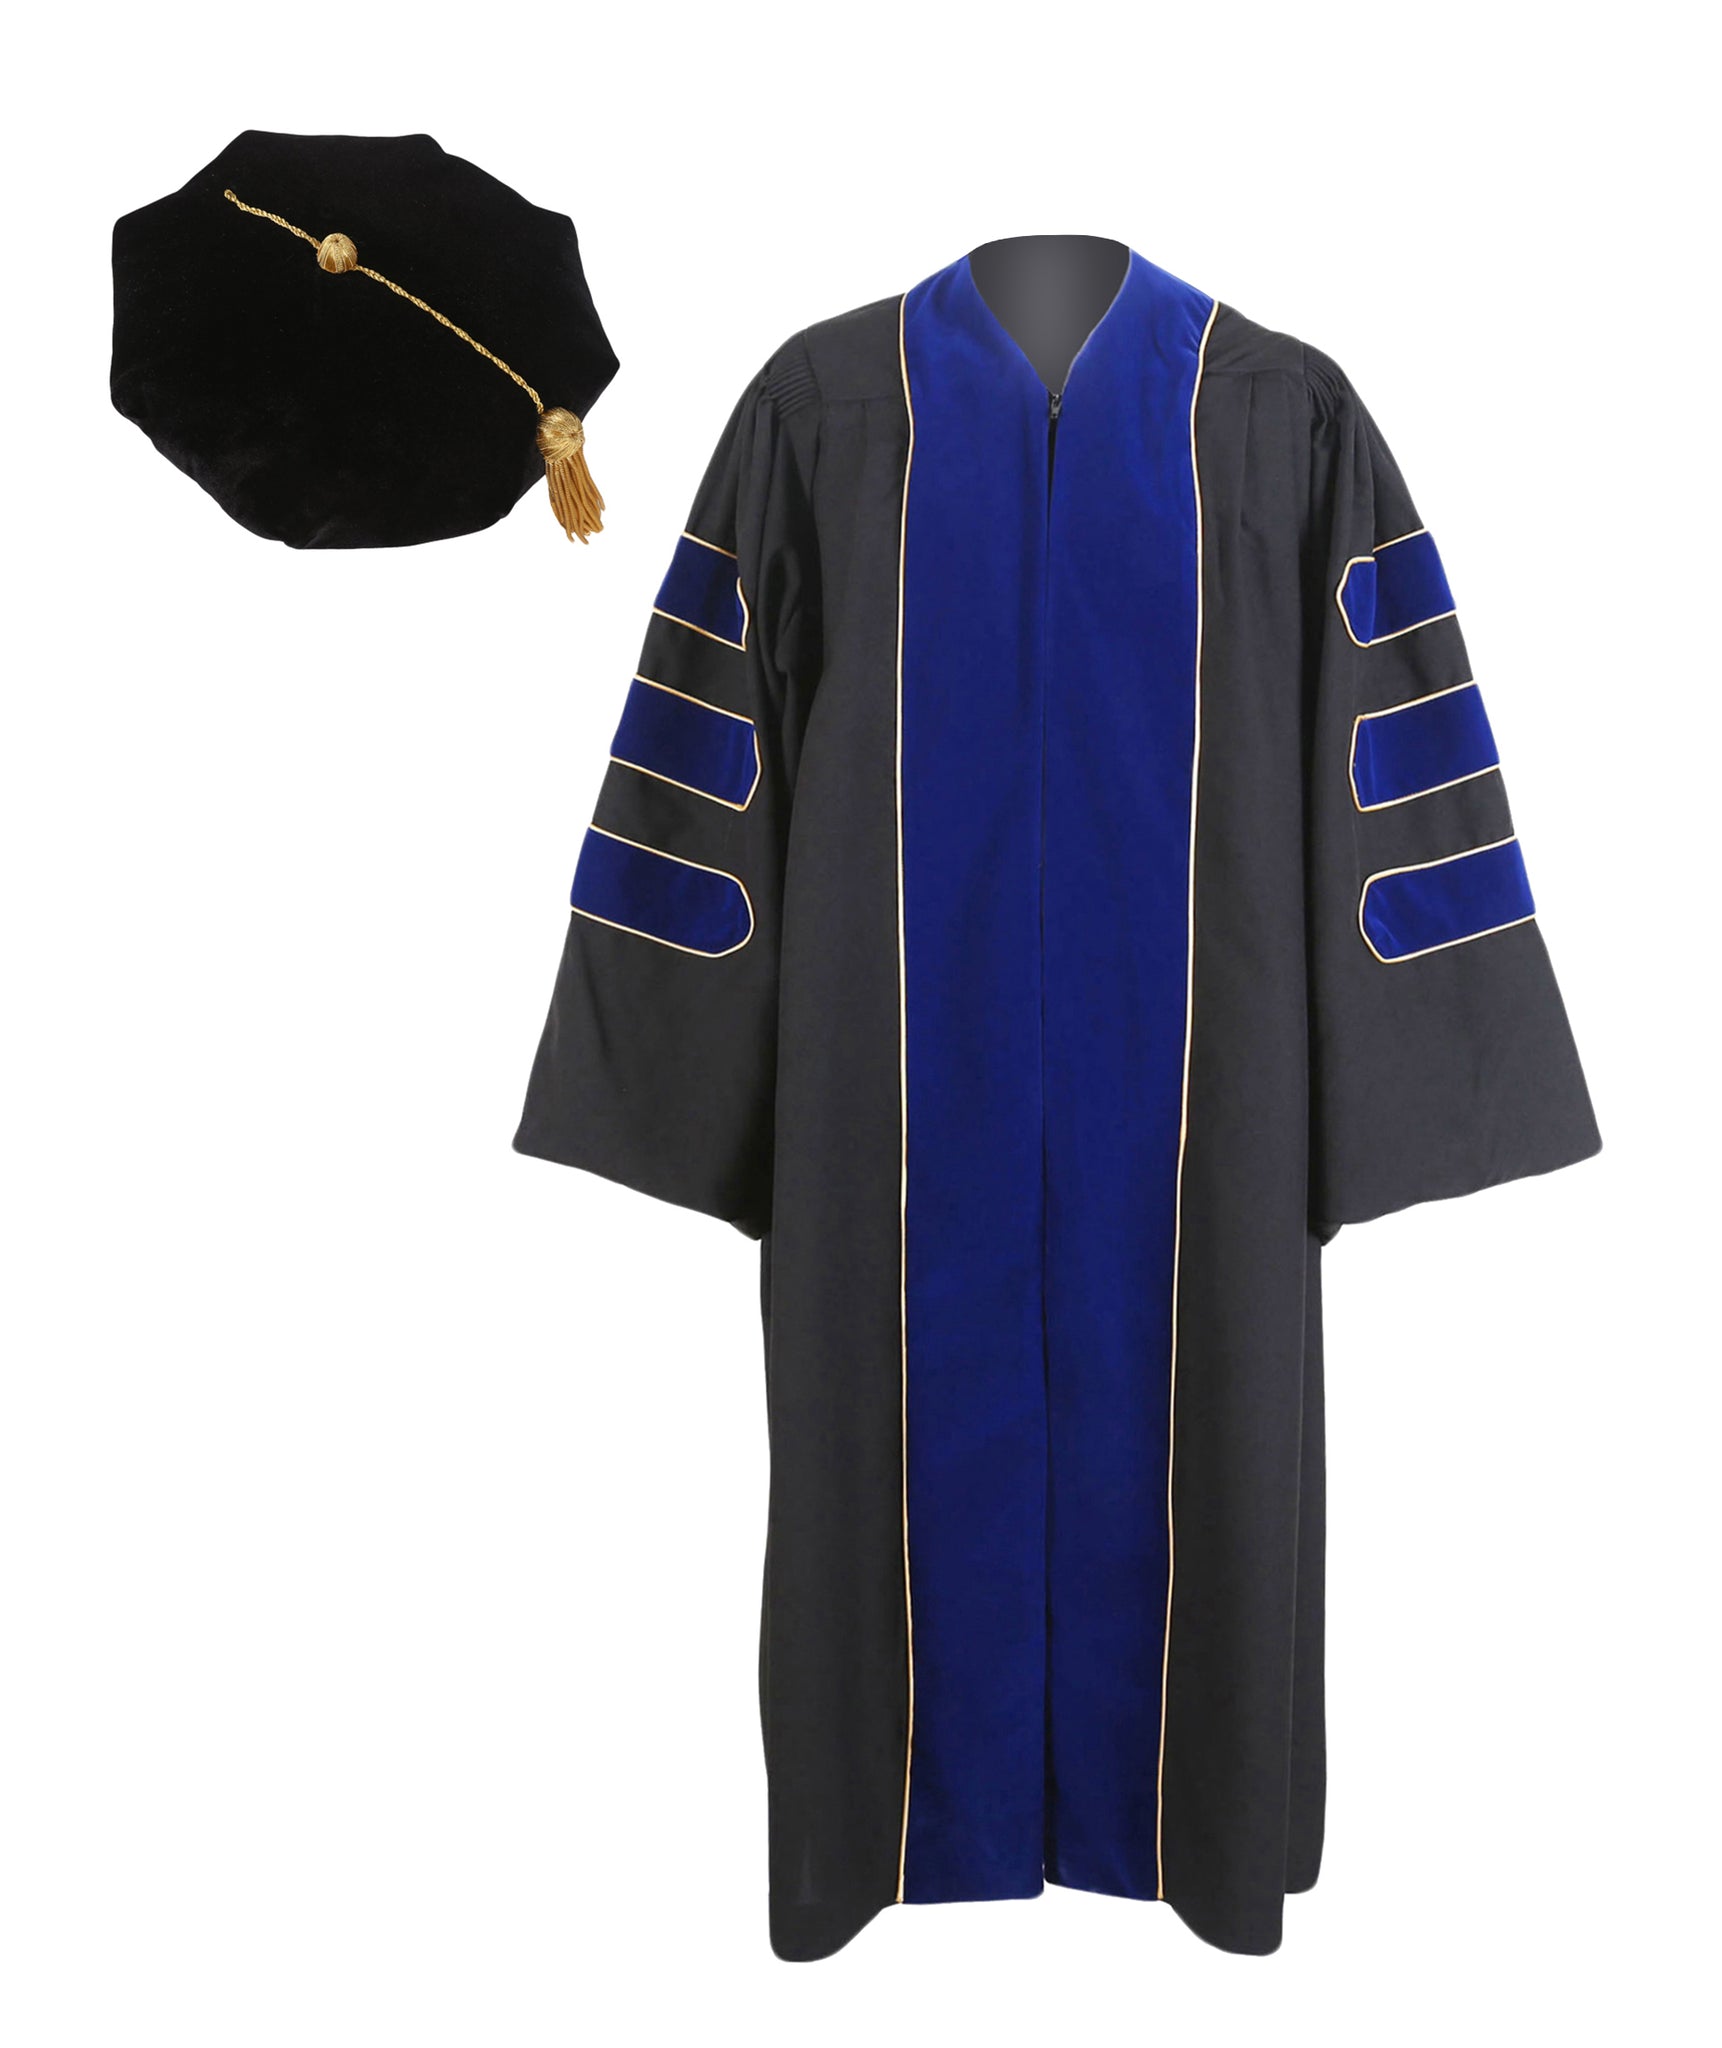 Deluxe Doctoral Graduation Gown with Gold Piping and Doctoral Tam Package (Royal Blue Velvet)